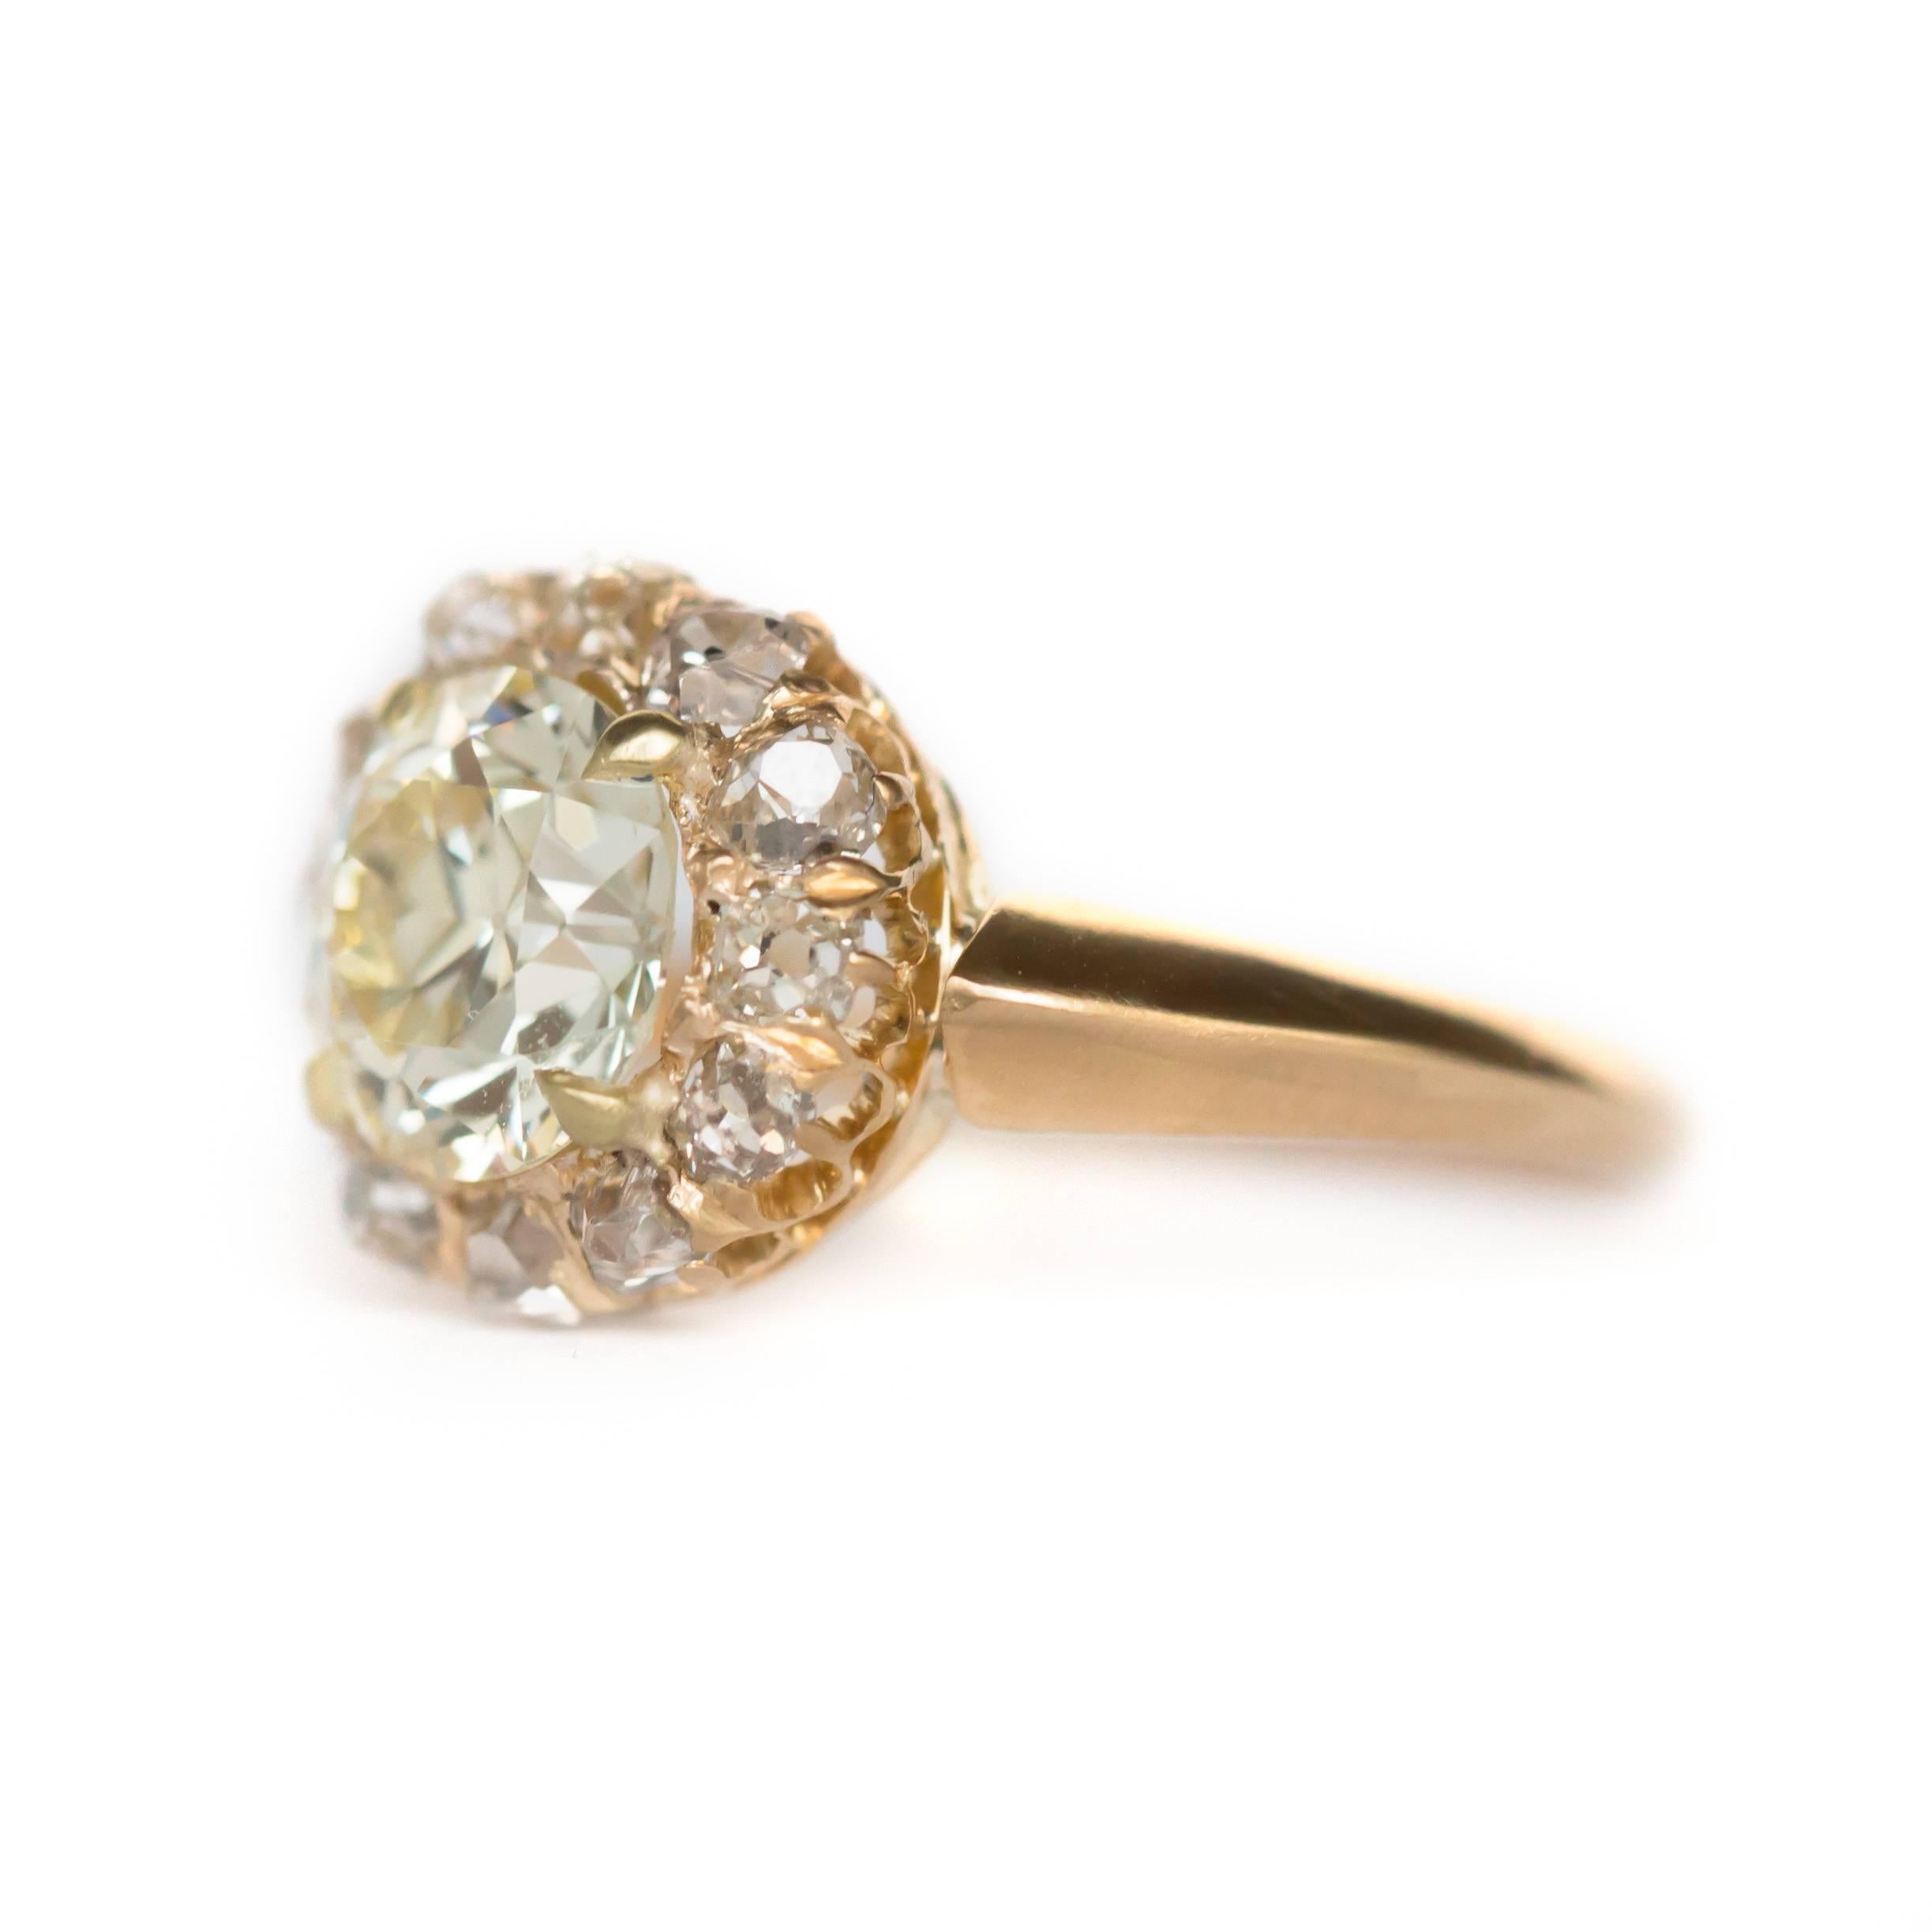 Item Details: 
Ring Size: Approximately 7.65
Metal Type: 14 Karat Yellow Gold
Weight: 3.7 grams

Center Diamond Details:
Shape: Old European
Carat Weight: 1.75 carat
Color: Fancy Light Yellow
Clarity: VS1

Side Stone Details: 
Shape: Old